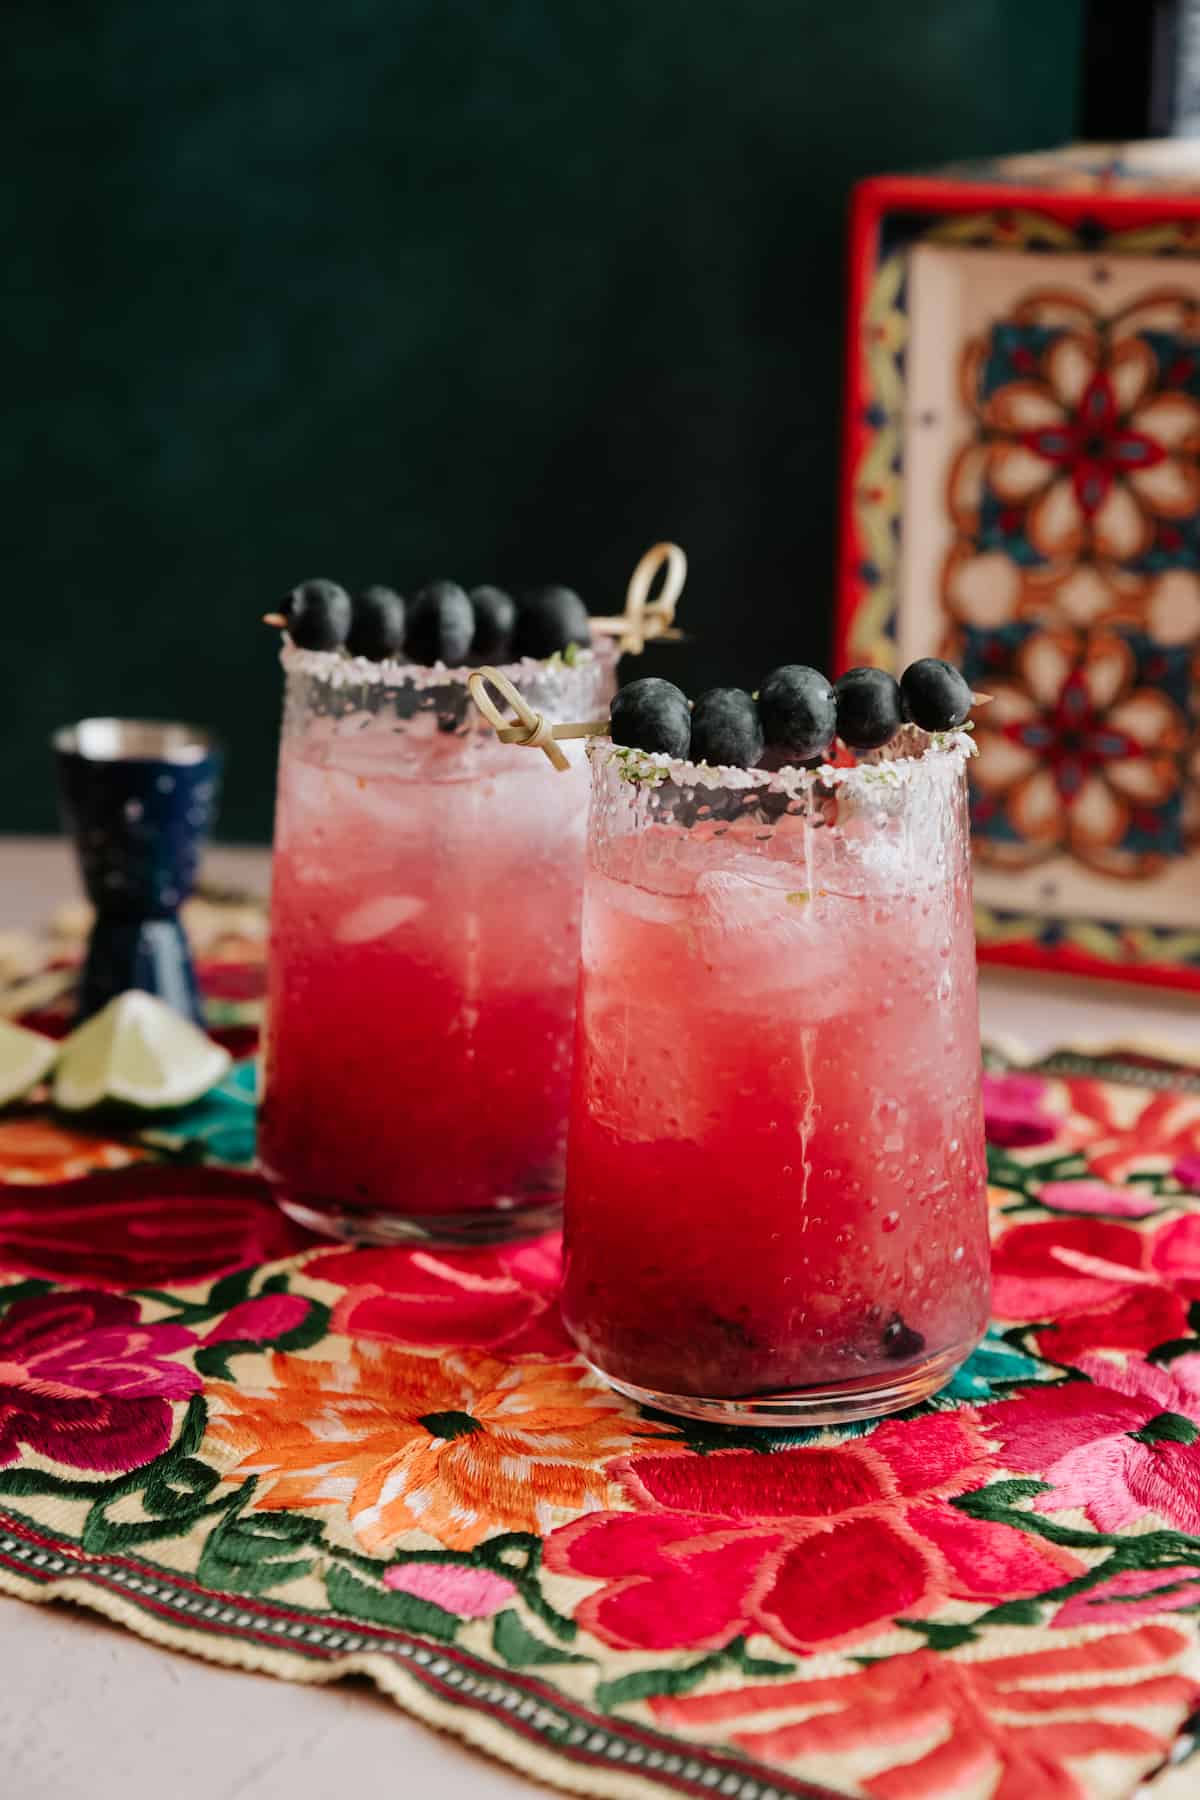 two blueberry margaritas adorned with toothpicks of blueberries on a floral printed tablecloth.